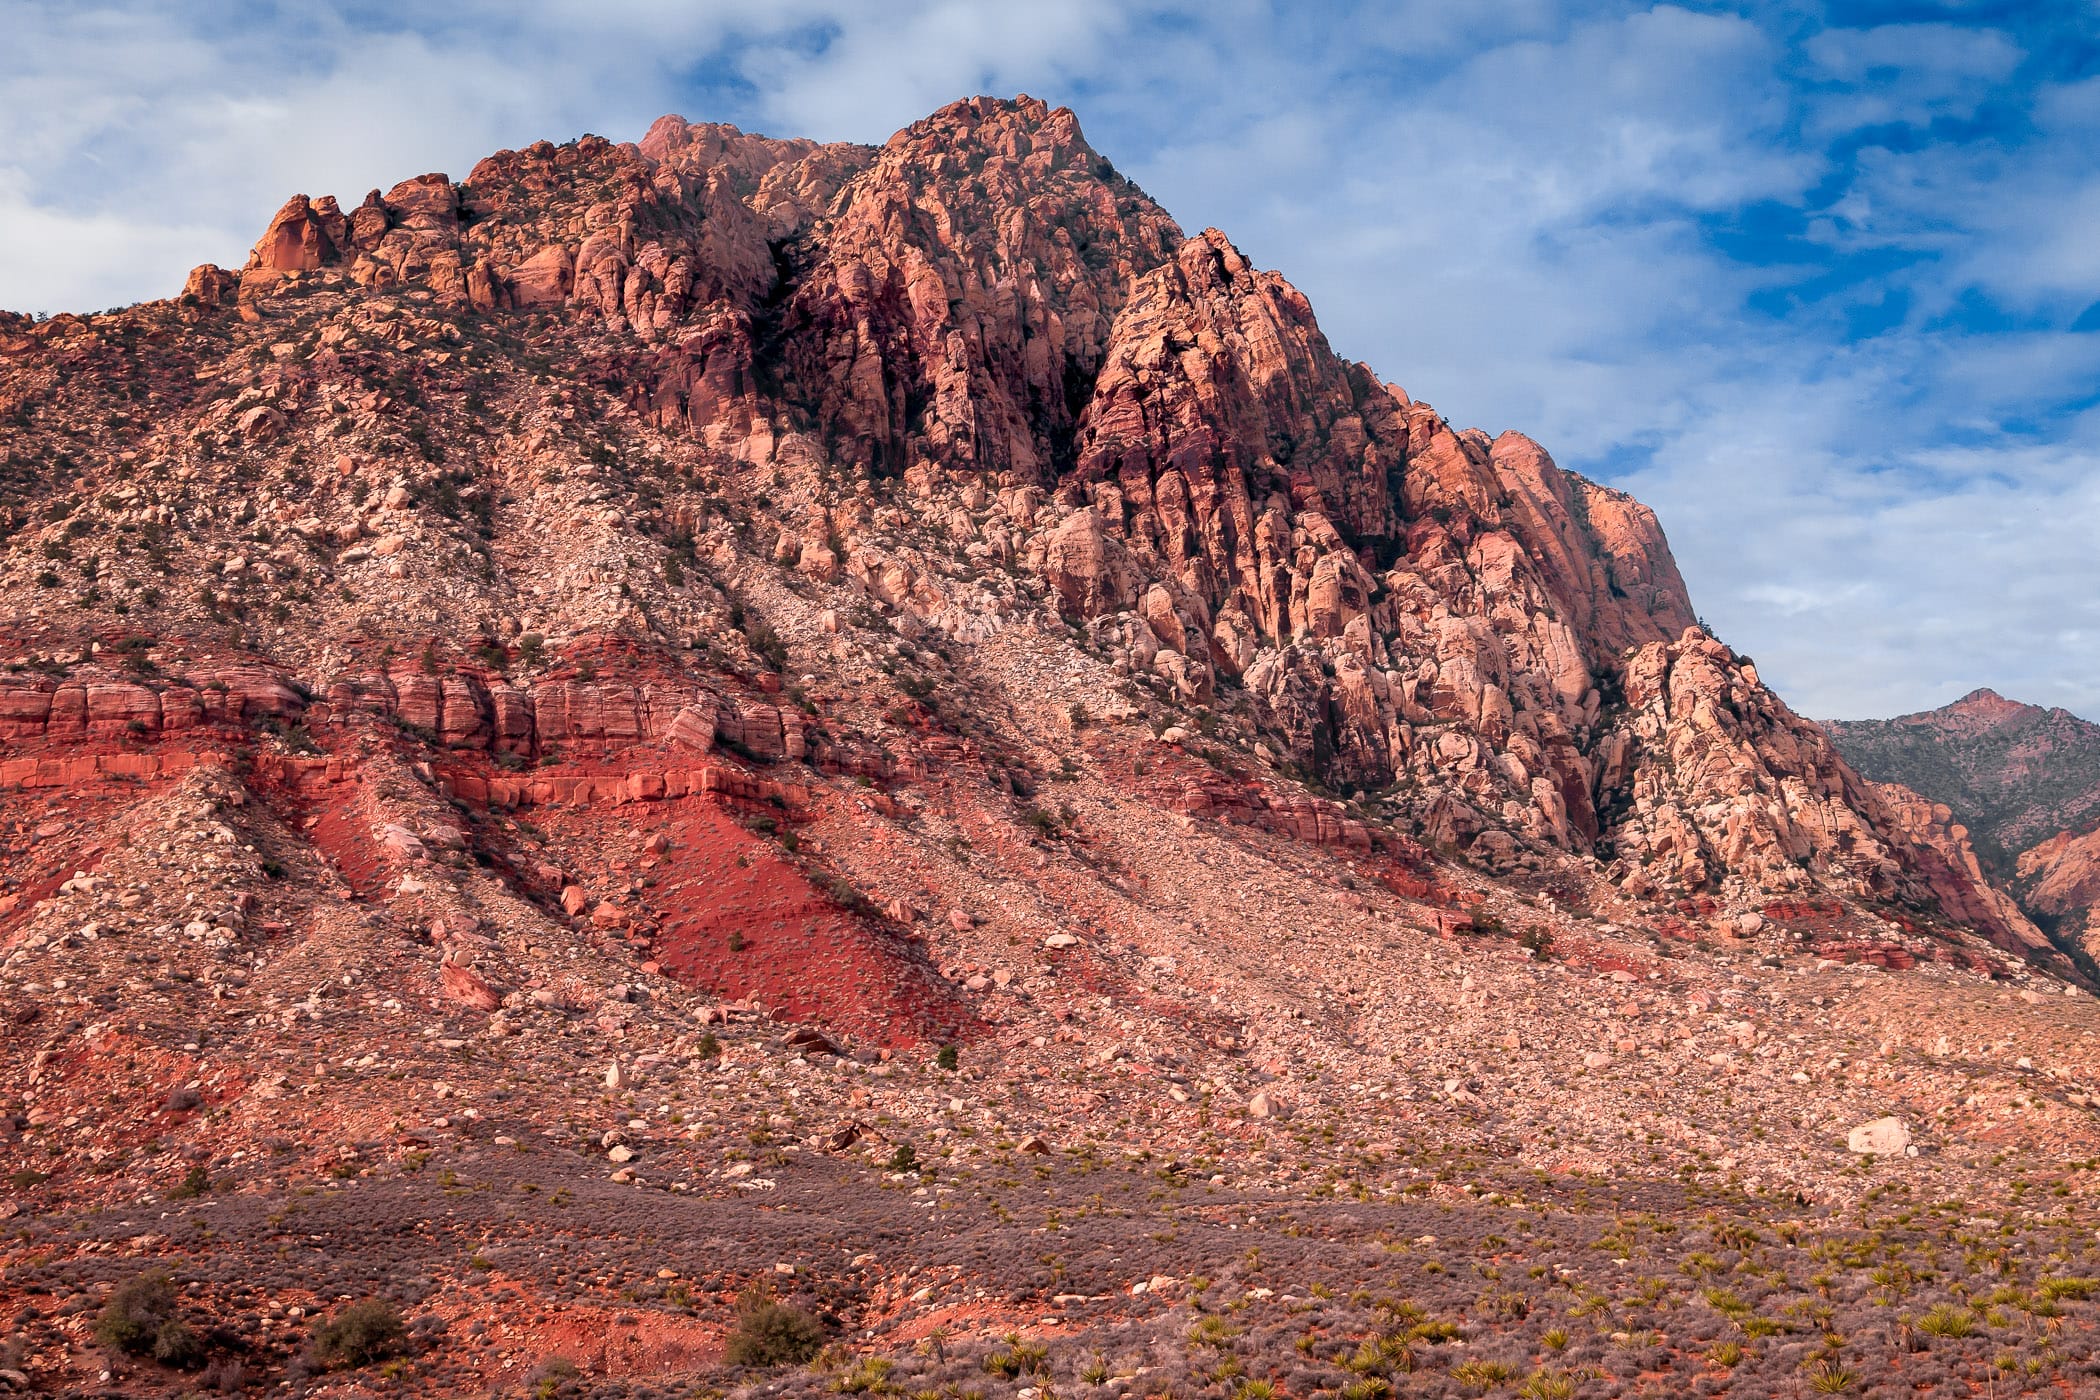 A rocky pinnacle rises into the sky in the Spring Mountains outside of Las Vegas.